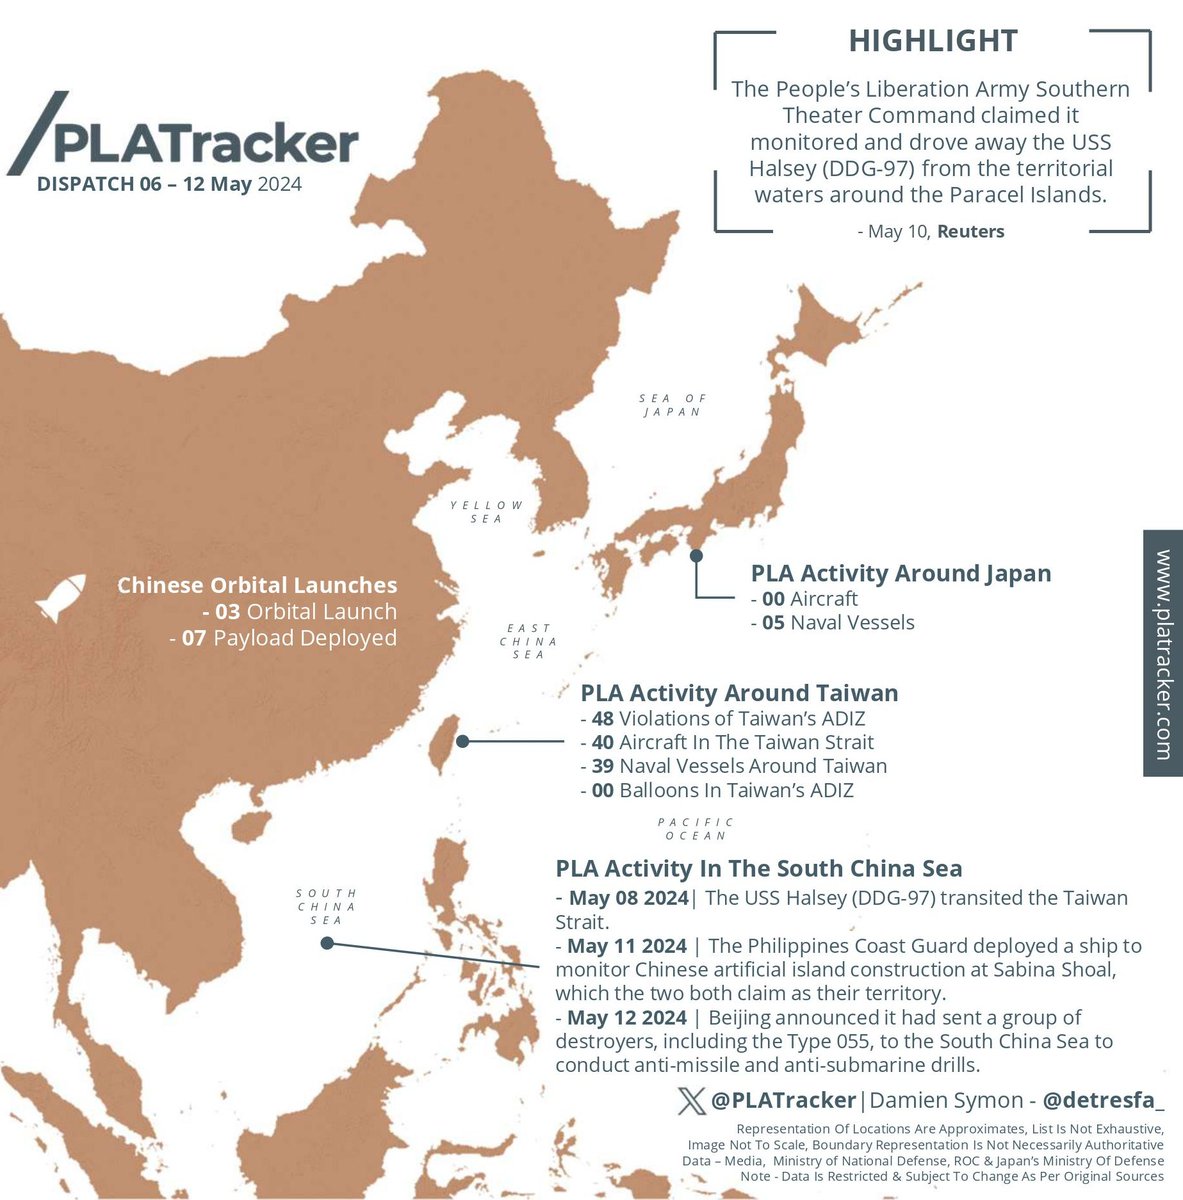 PLATracker DISPATCH 06 - 12 May 2024 Partnering with @detresfa_ we track PLA activity around Taiwan, Chinese Coast Guard activity near Kinmen, and more: